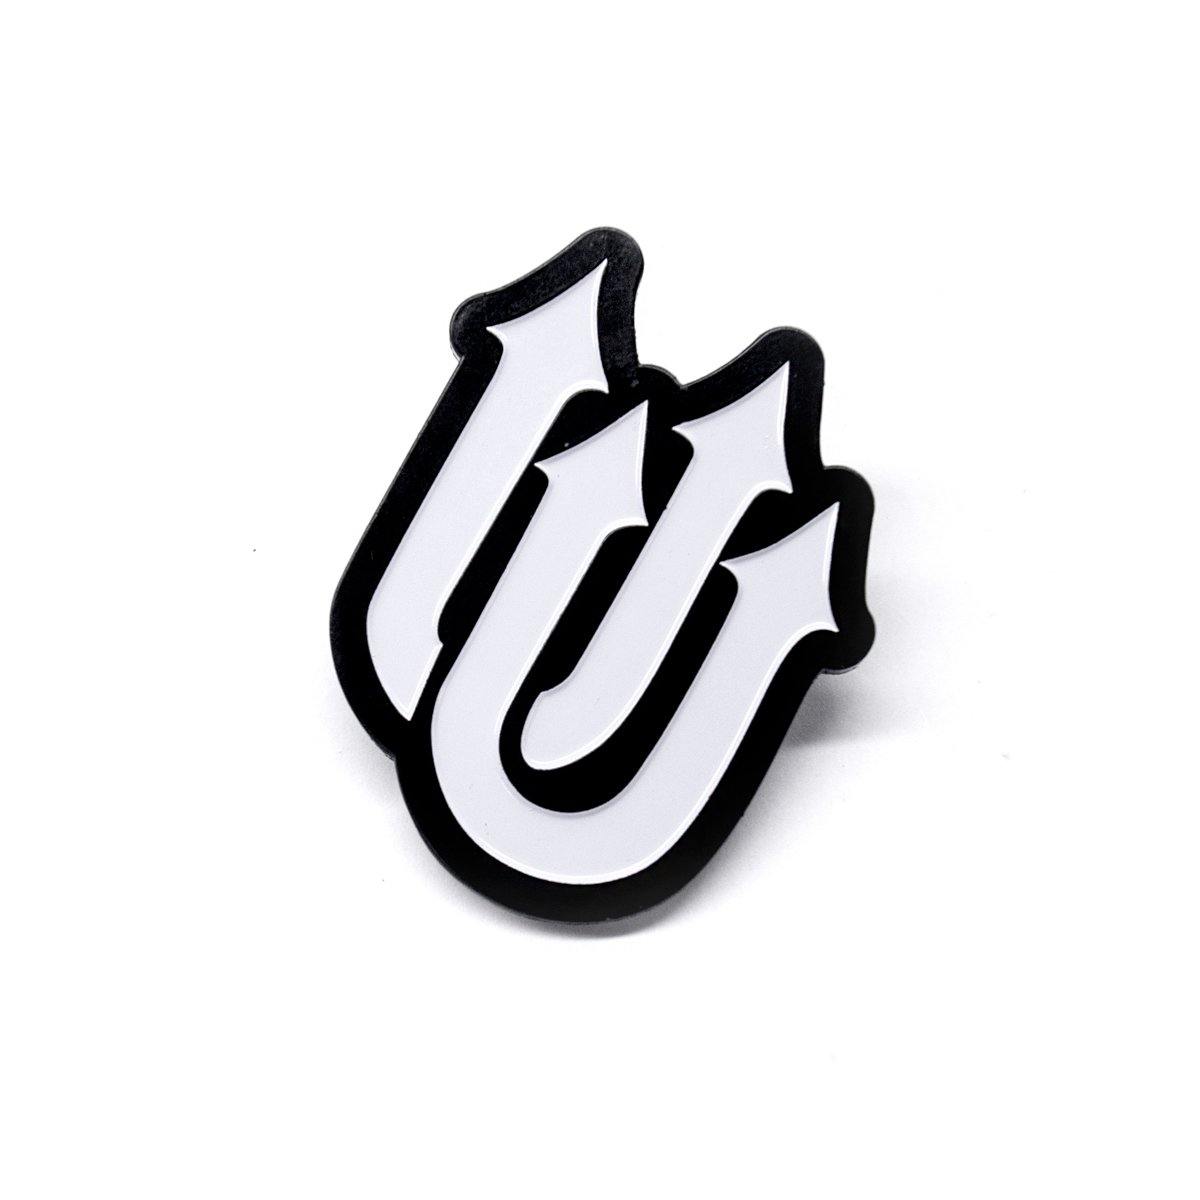 Buy – Cold Cuts Limited "CCL Logo" Pin – Band & Music Merch – Cold Cuts Merch